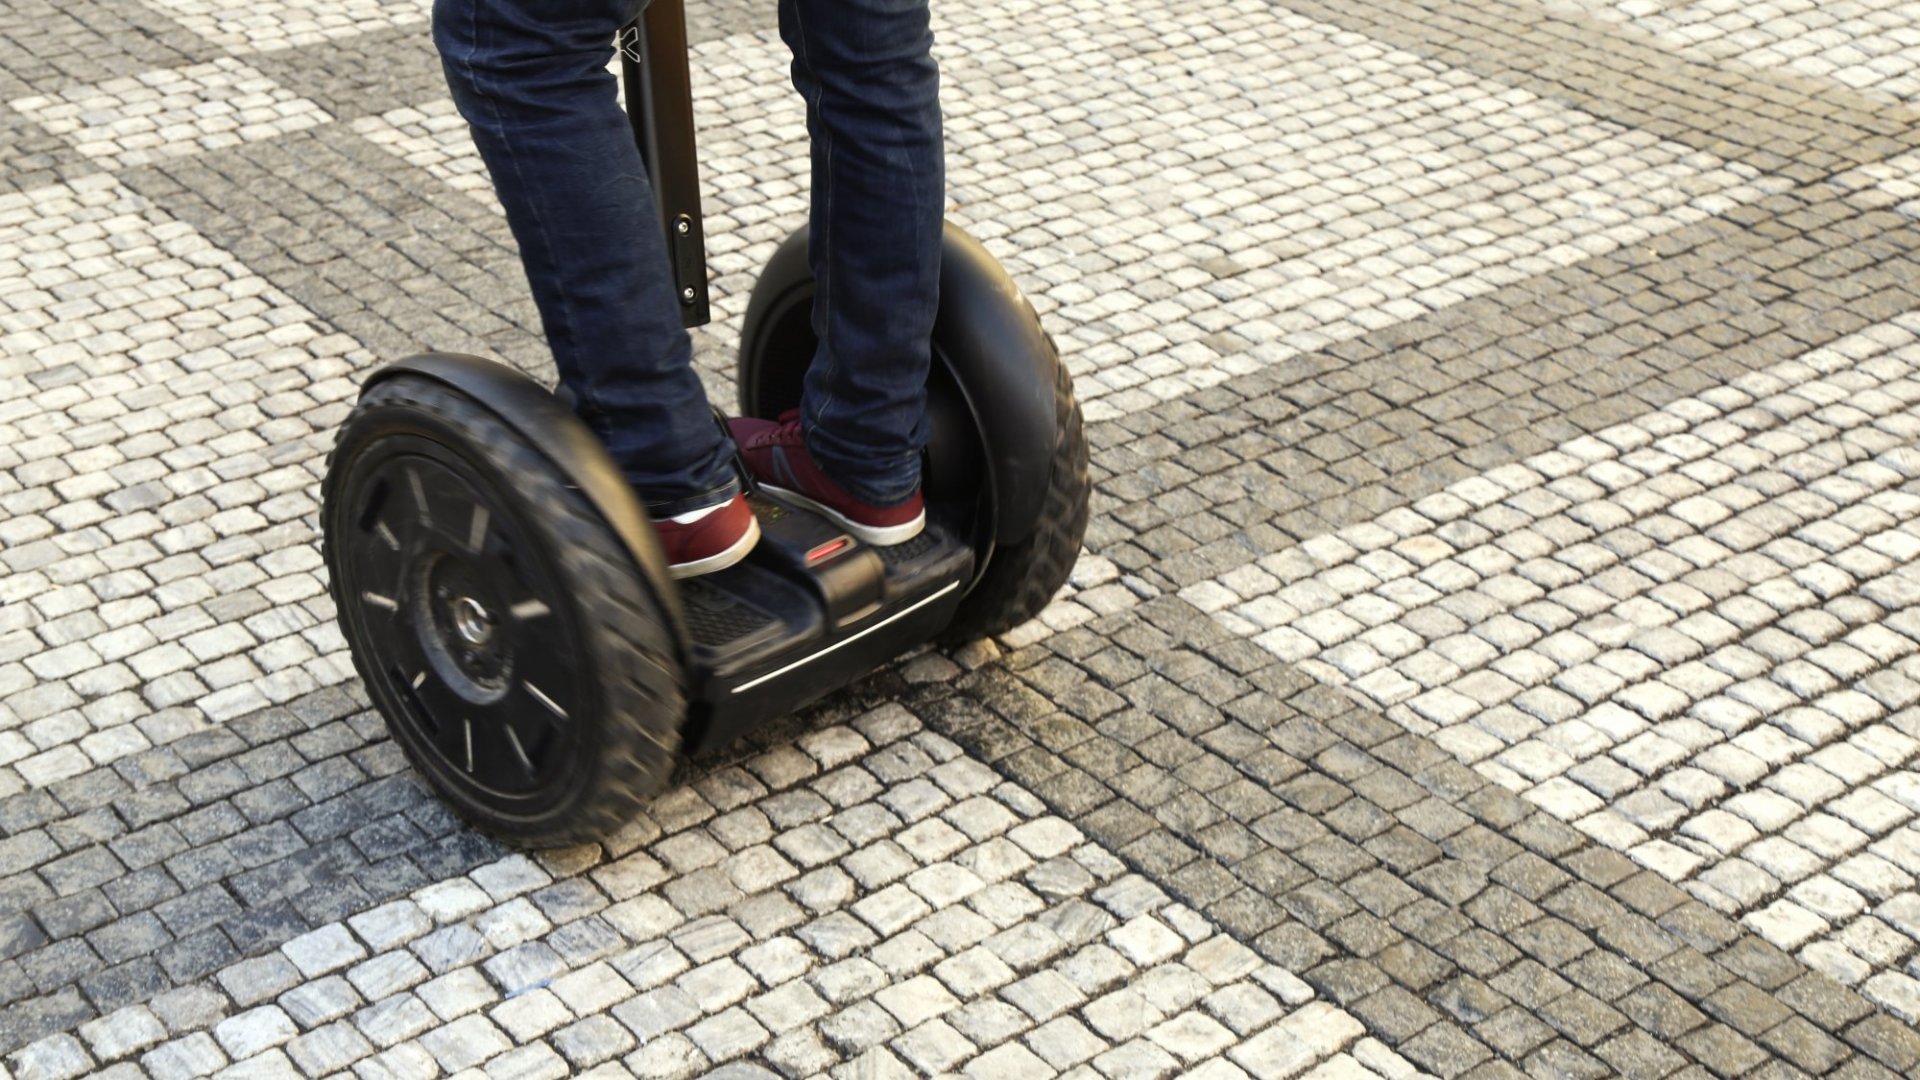 Segway Scooters